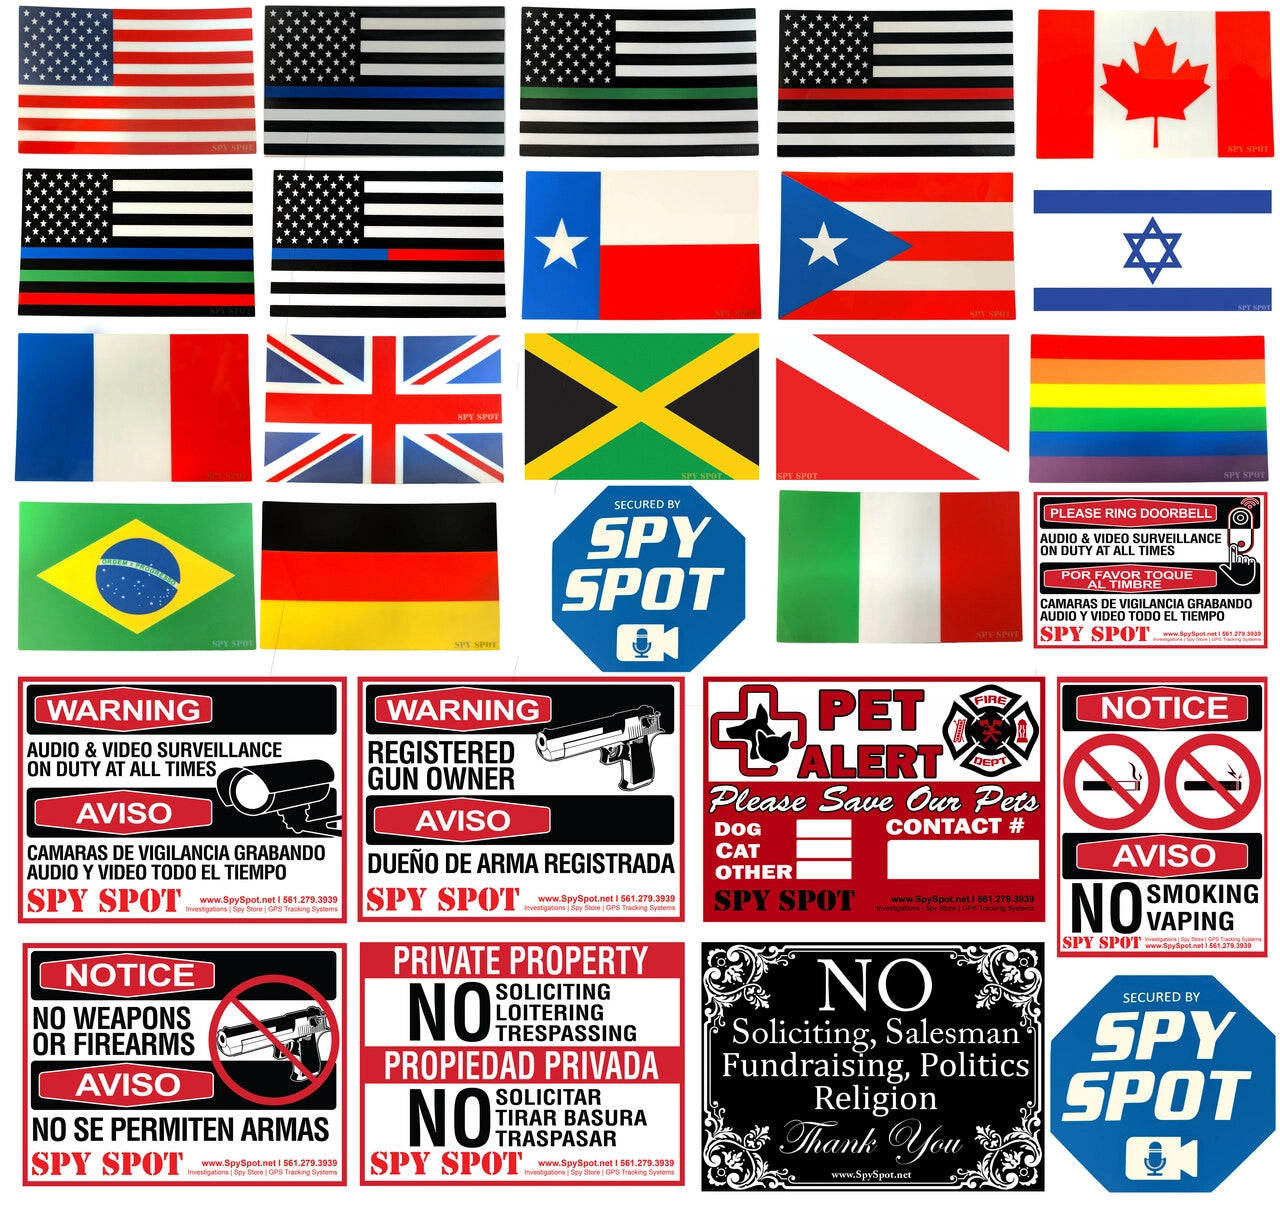 Thin Blue Line Black White and Blue Flag Decal Car Stickers American Flag Support Police and Law Enforcement UV Resistant Weatherproof 4"x 2.5" Set of 4 Spy Spot